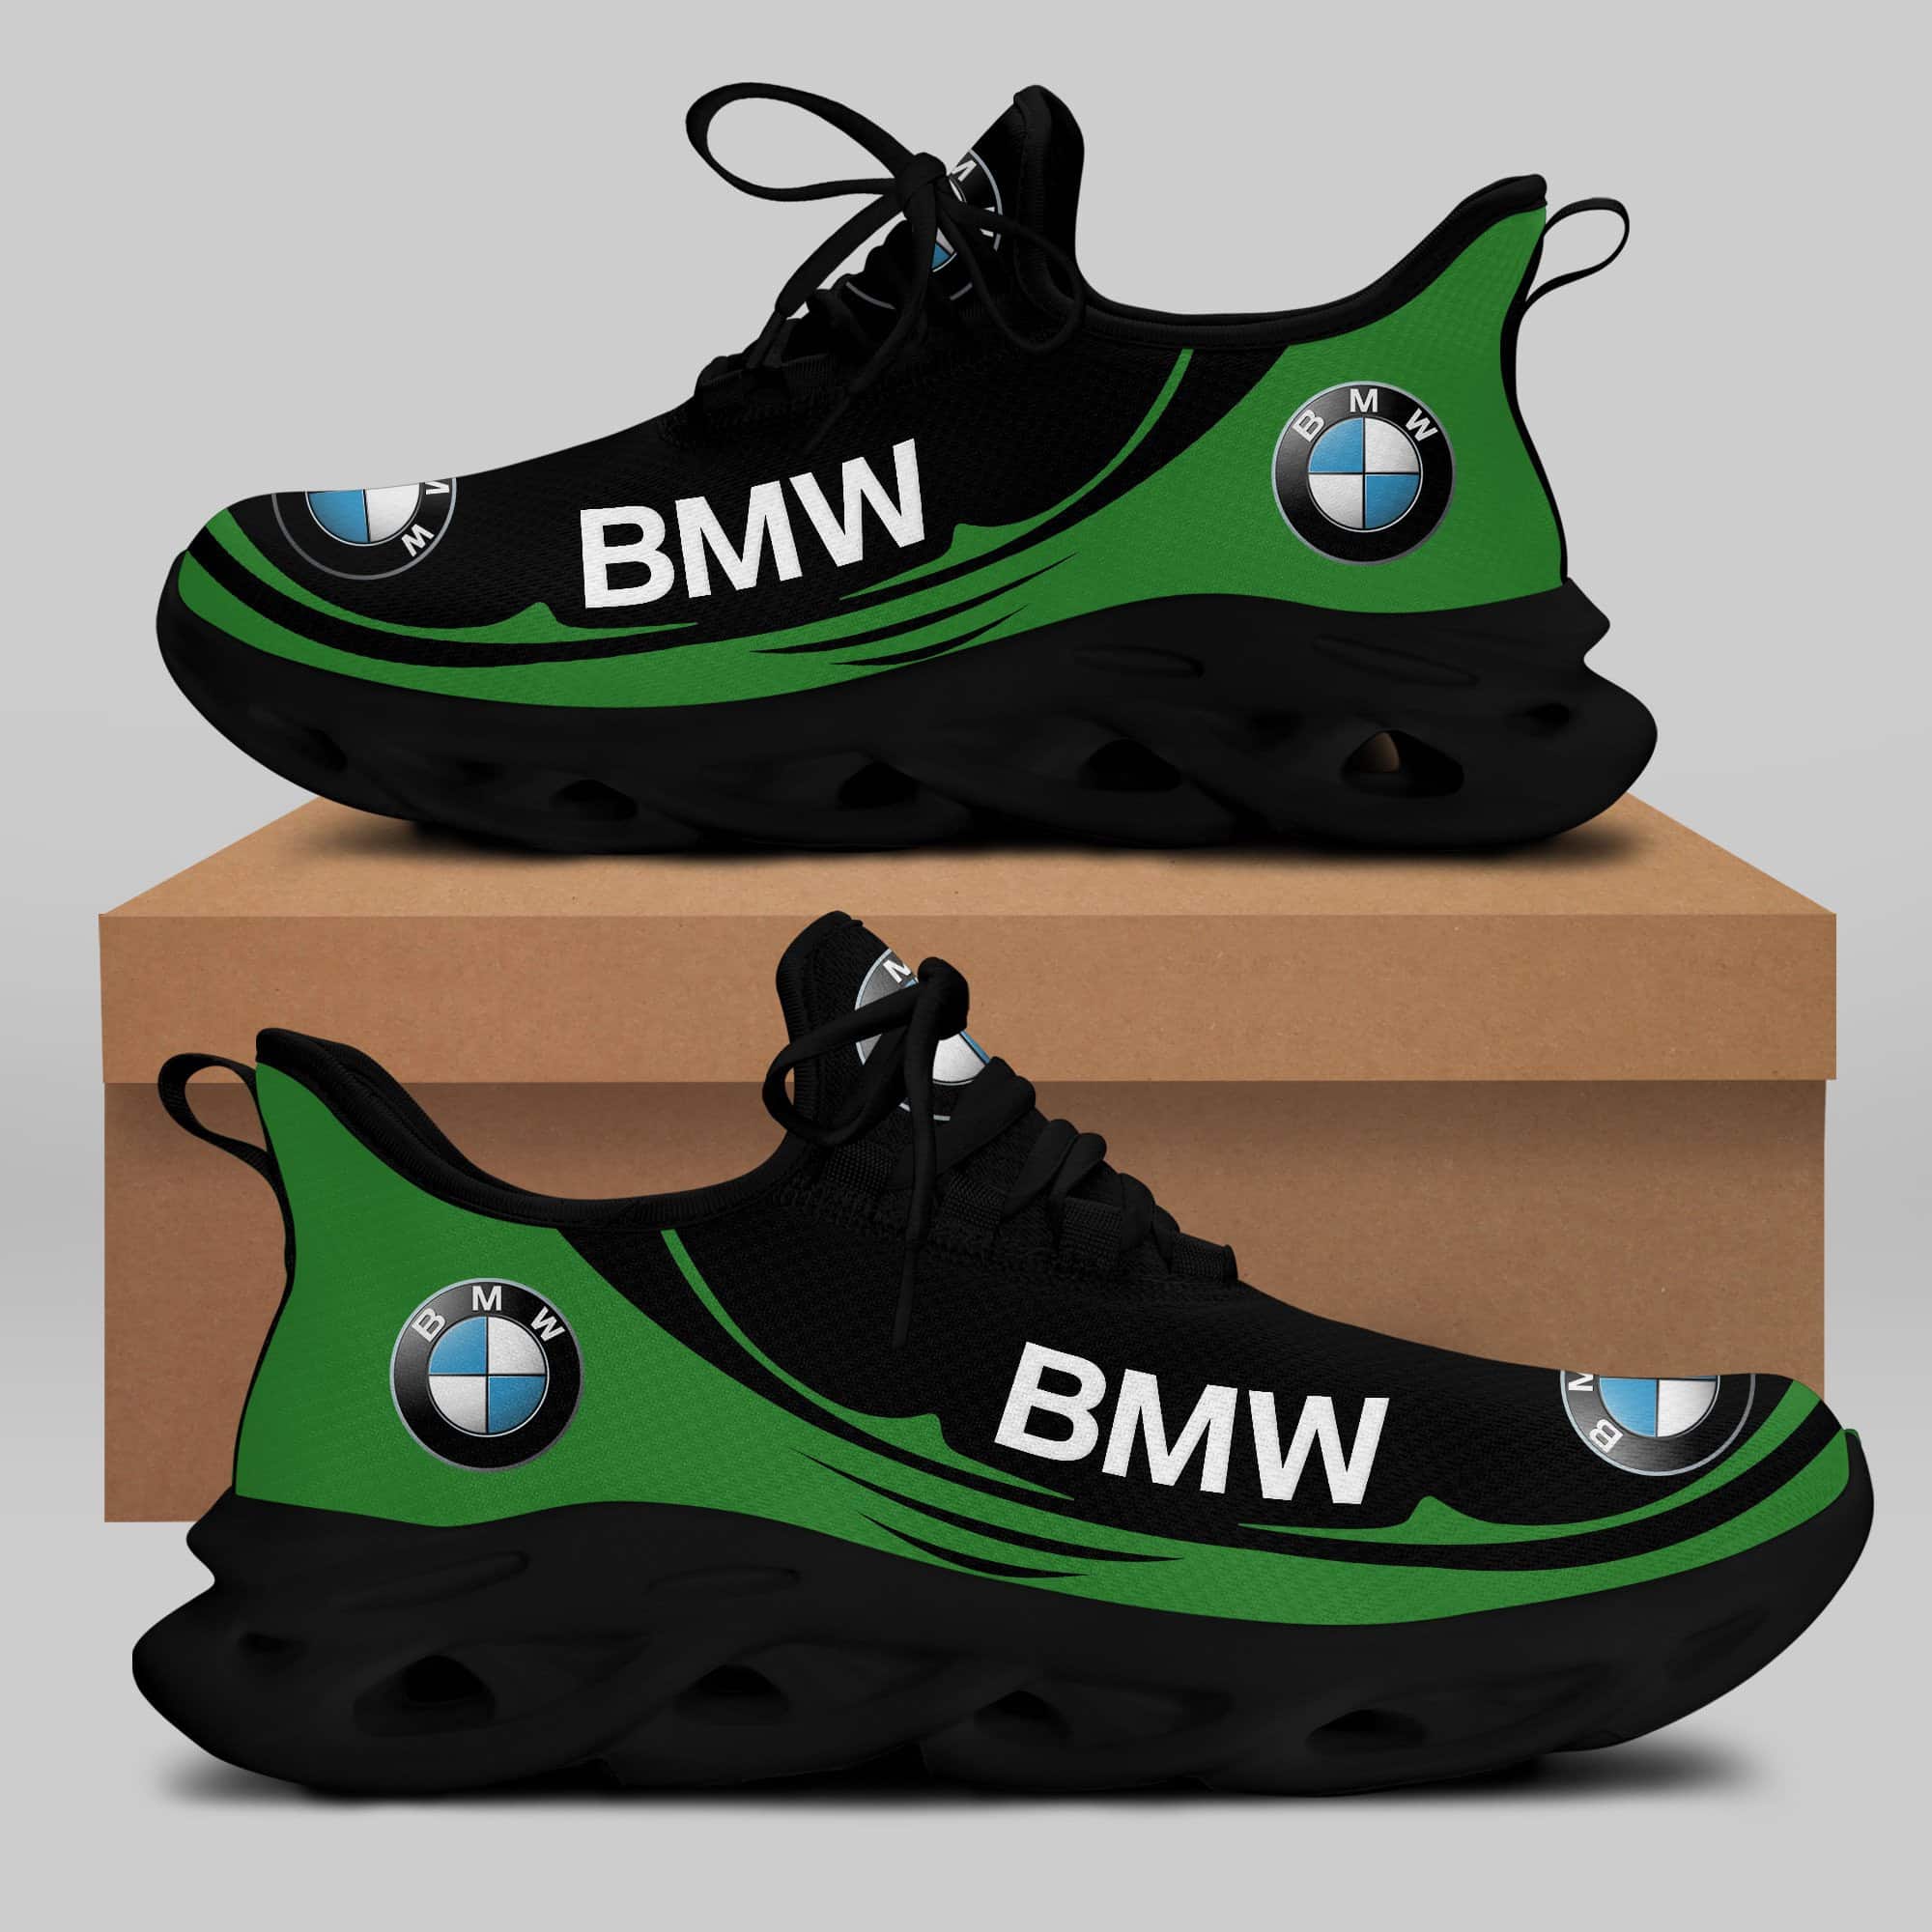 Bmw Running Shoes Max Soul Shoes Sneakers Ver 28 1